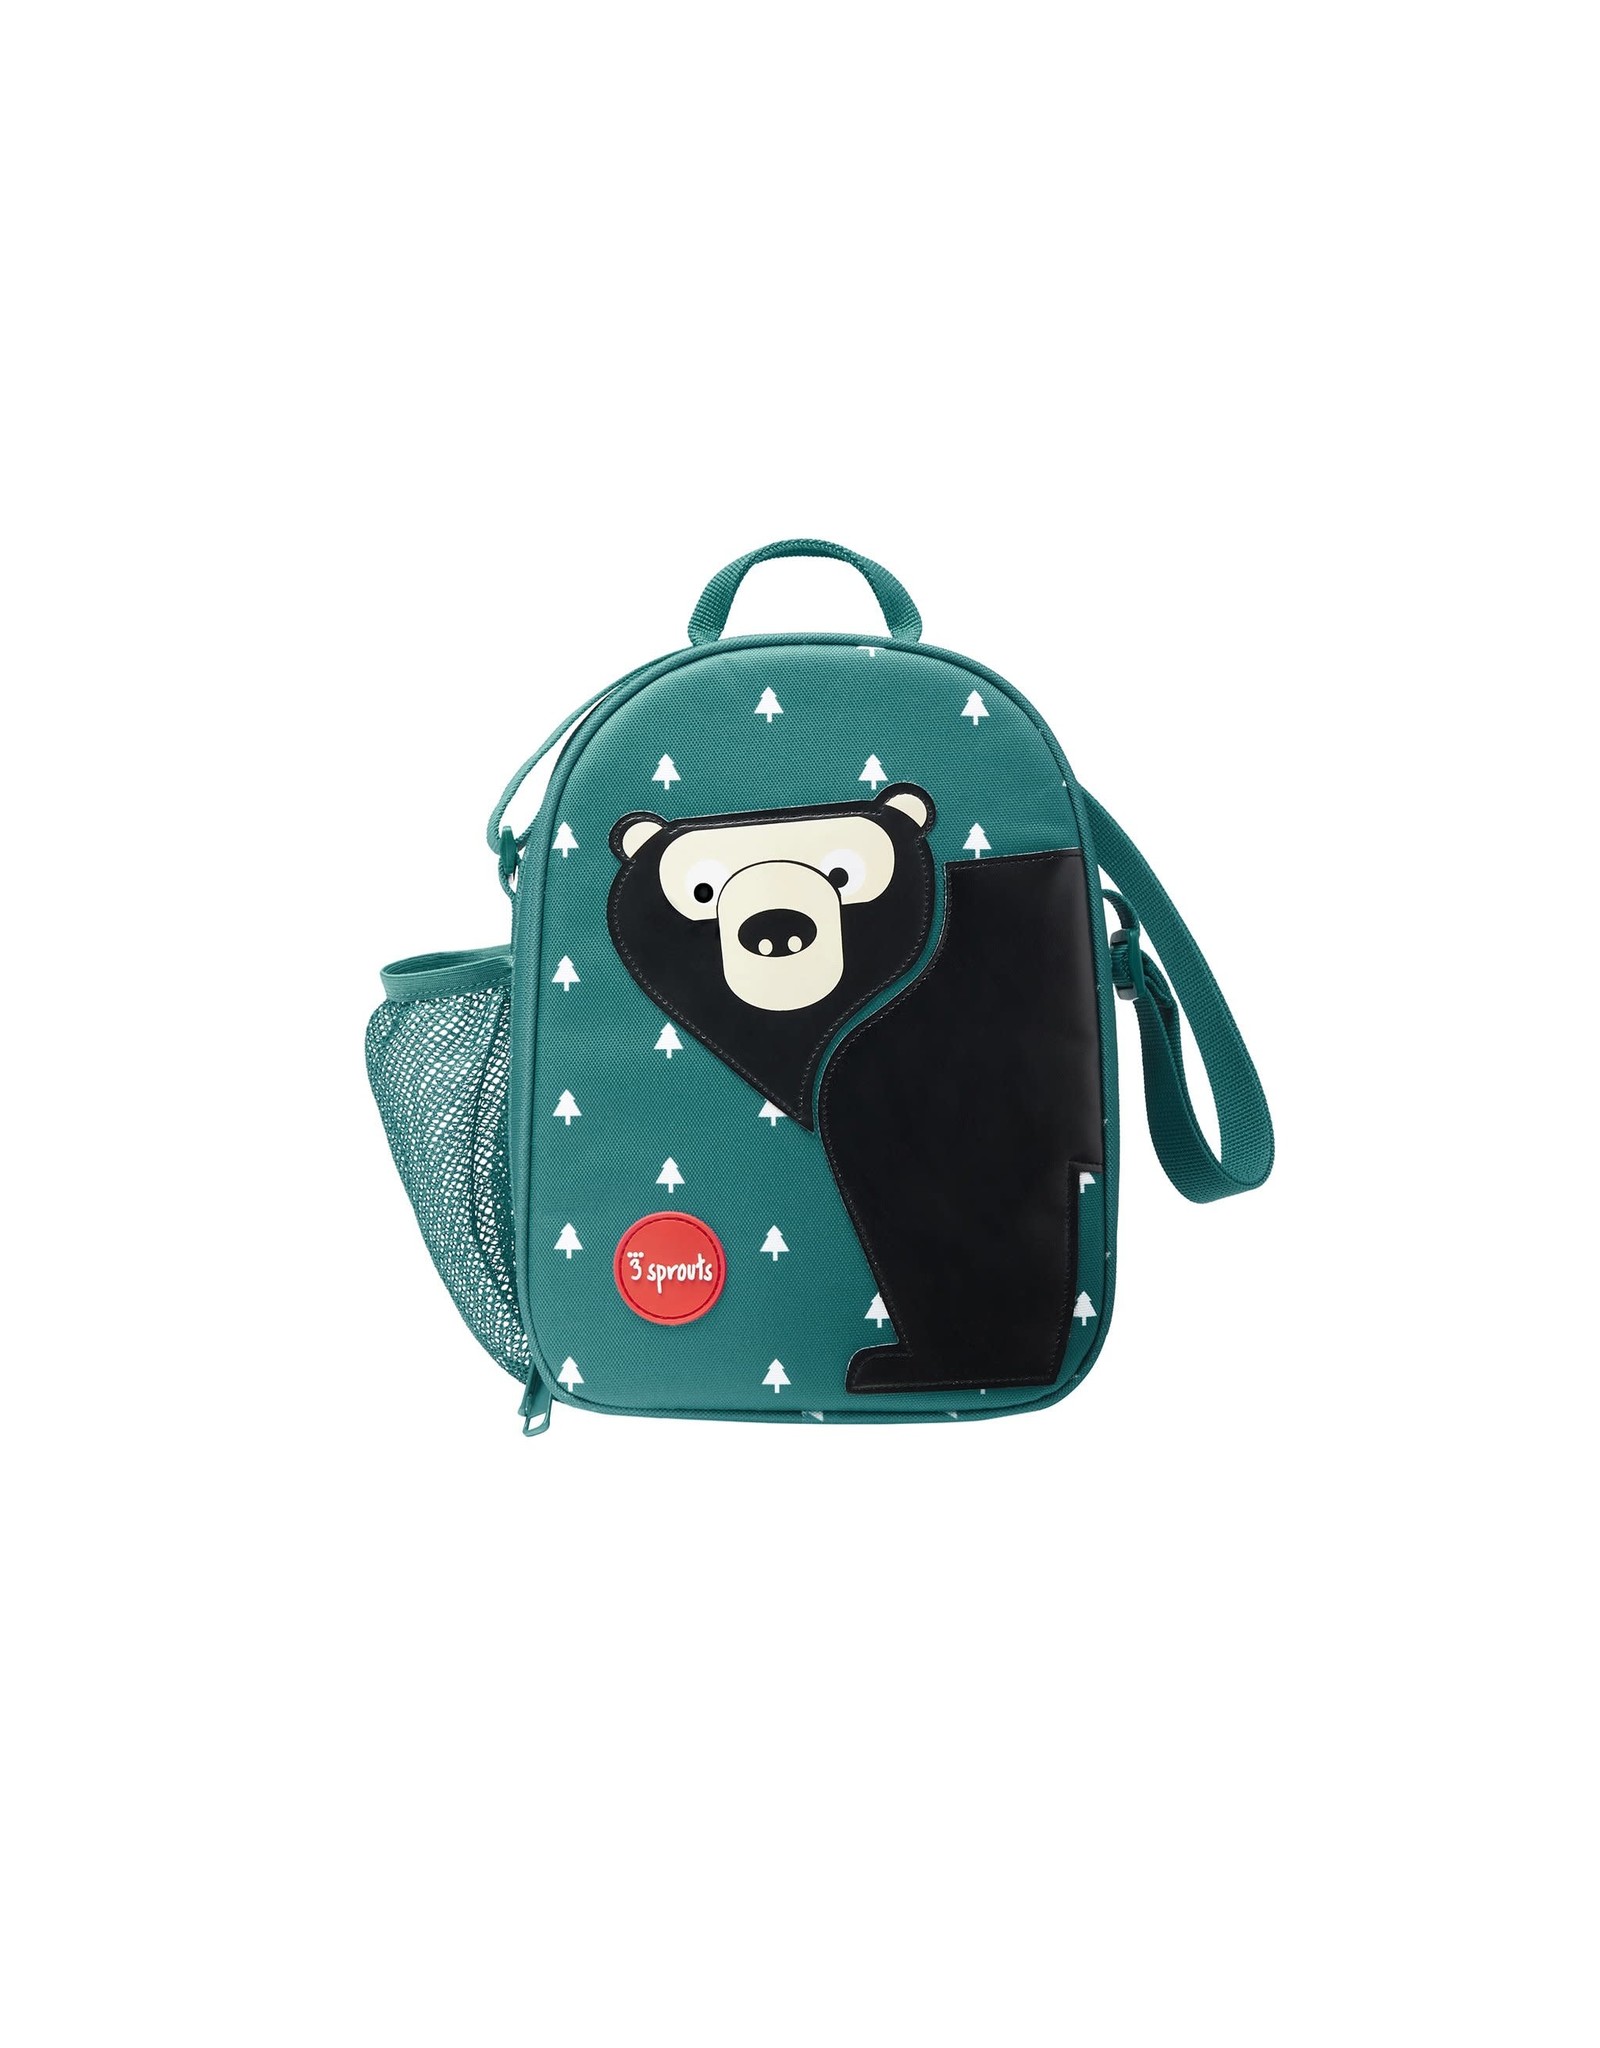 3 Sprouts Lunch Bag Teal Bear